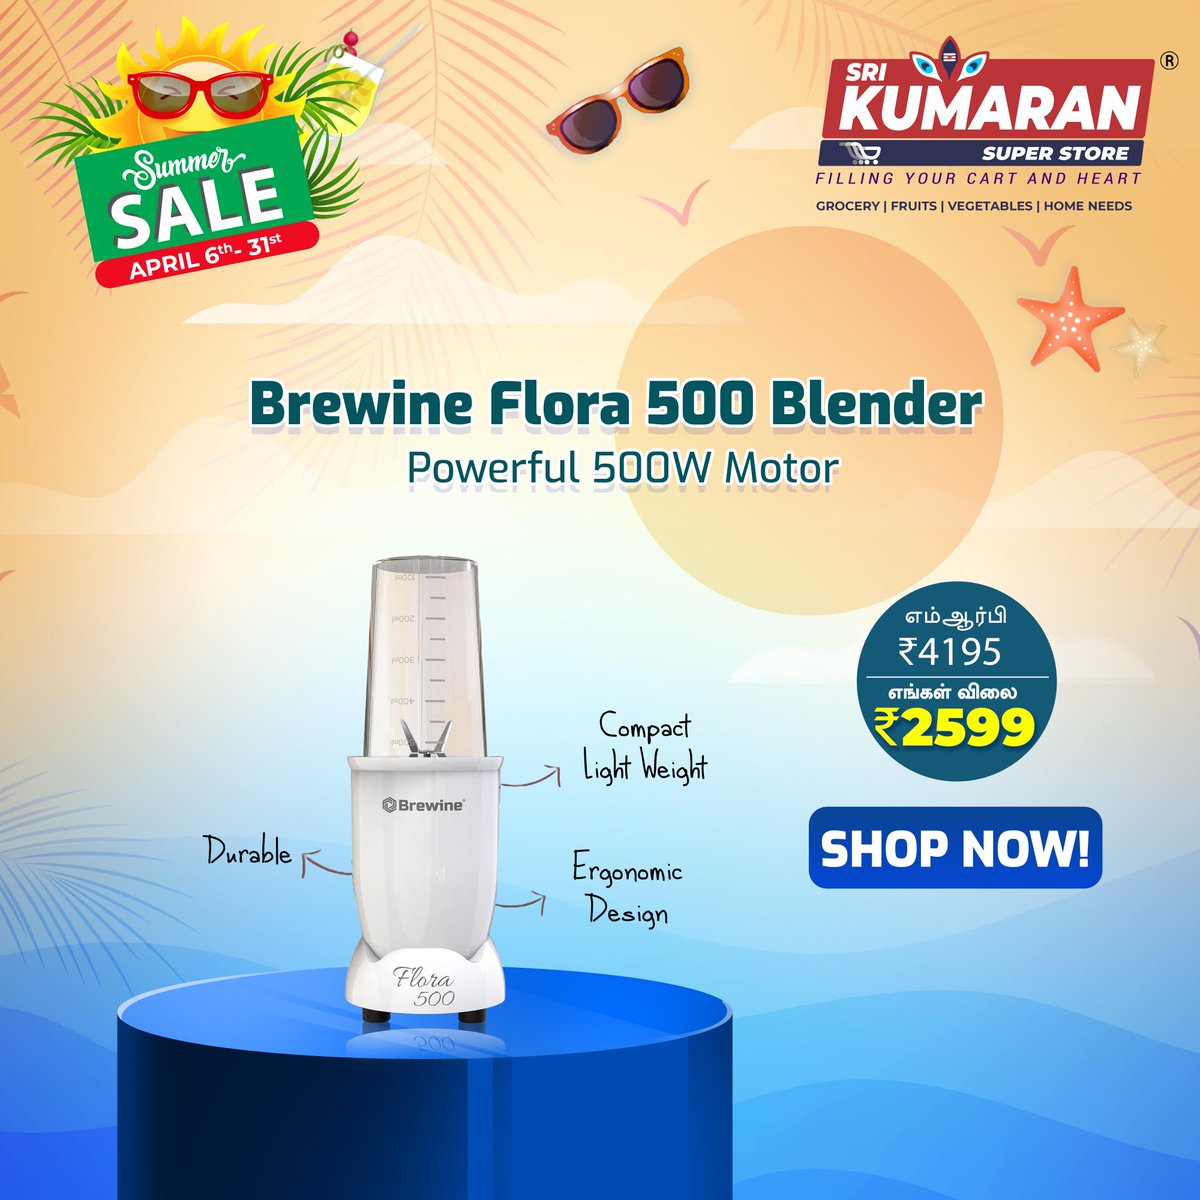 Beat the heat with the coolest companion: Brewine Flora 500 blender! Swing by Sri Kumaran Super Store's summer sale and elevate your summer sips! 🌊❄️

#brewnieblender #blender #flora #GreatDeals #srikumaransuperstore #SummerSale2024 #deal #offers #buynow